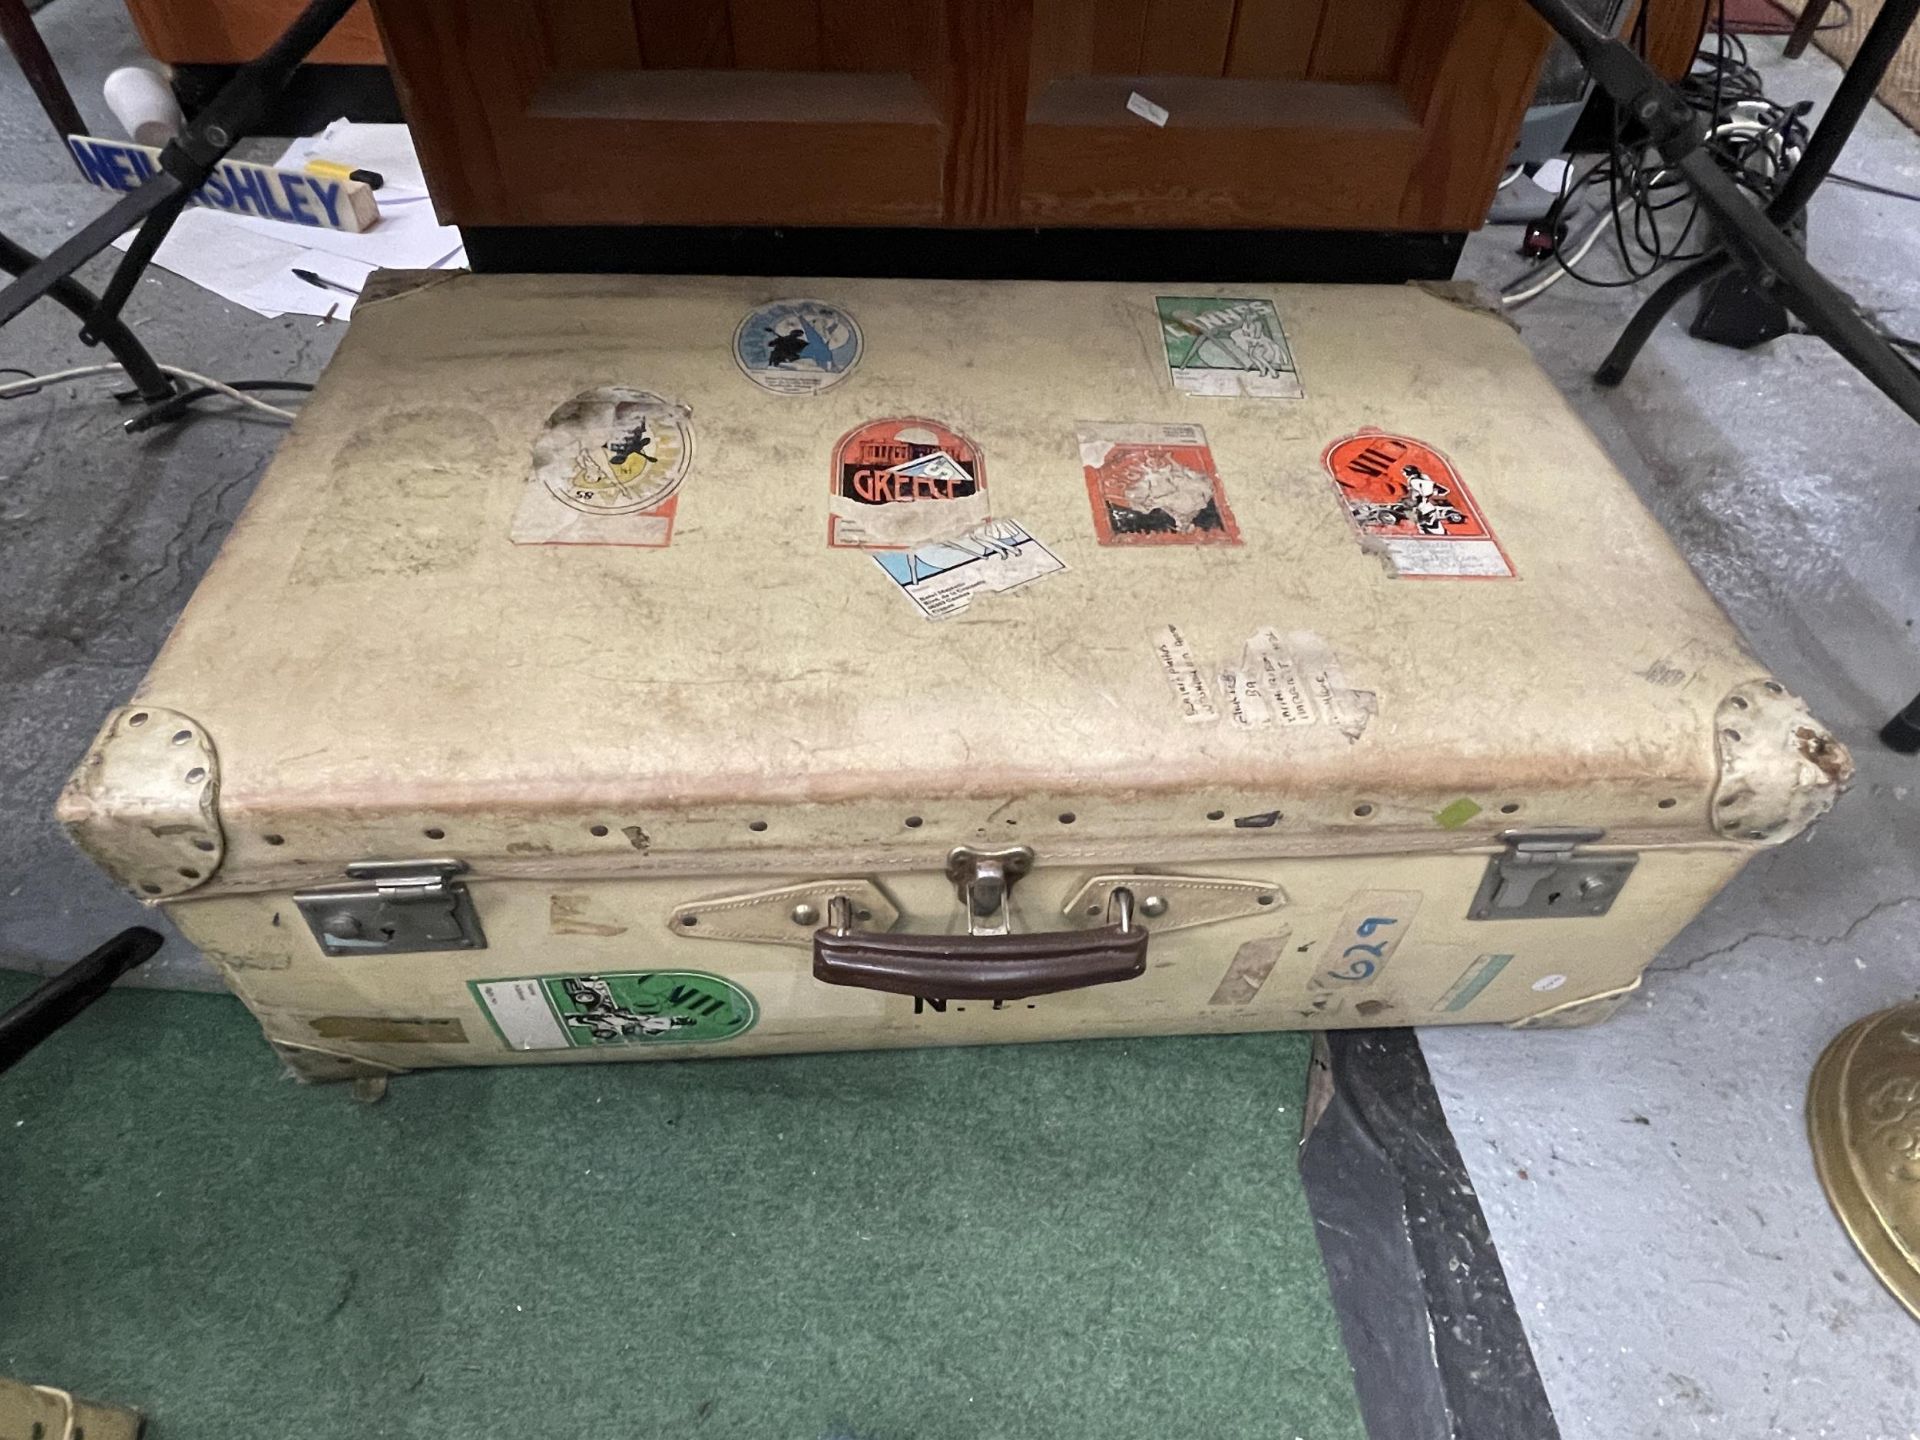 TWO HARRODS VINTAGE TRAVELLING TRUNKS / SUITCASES BOTH WITH N.P INTIALS - Image 2 of 3